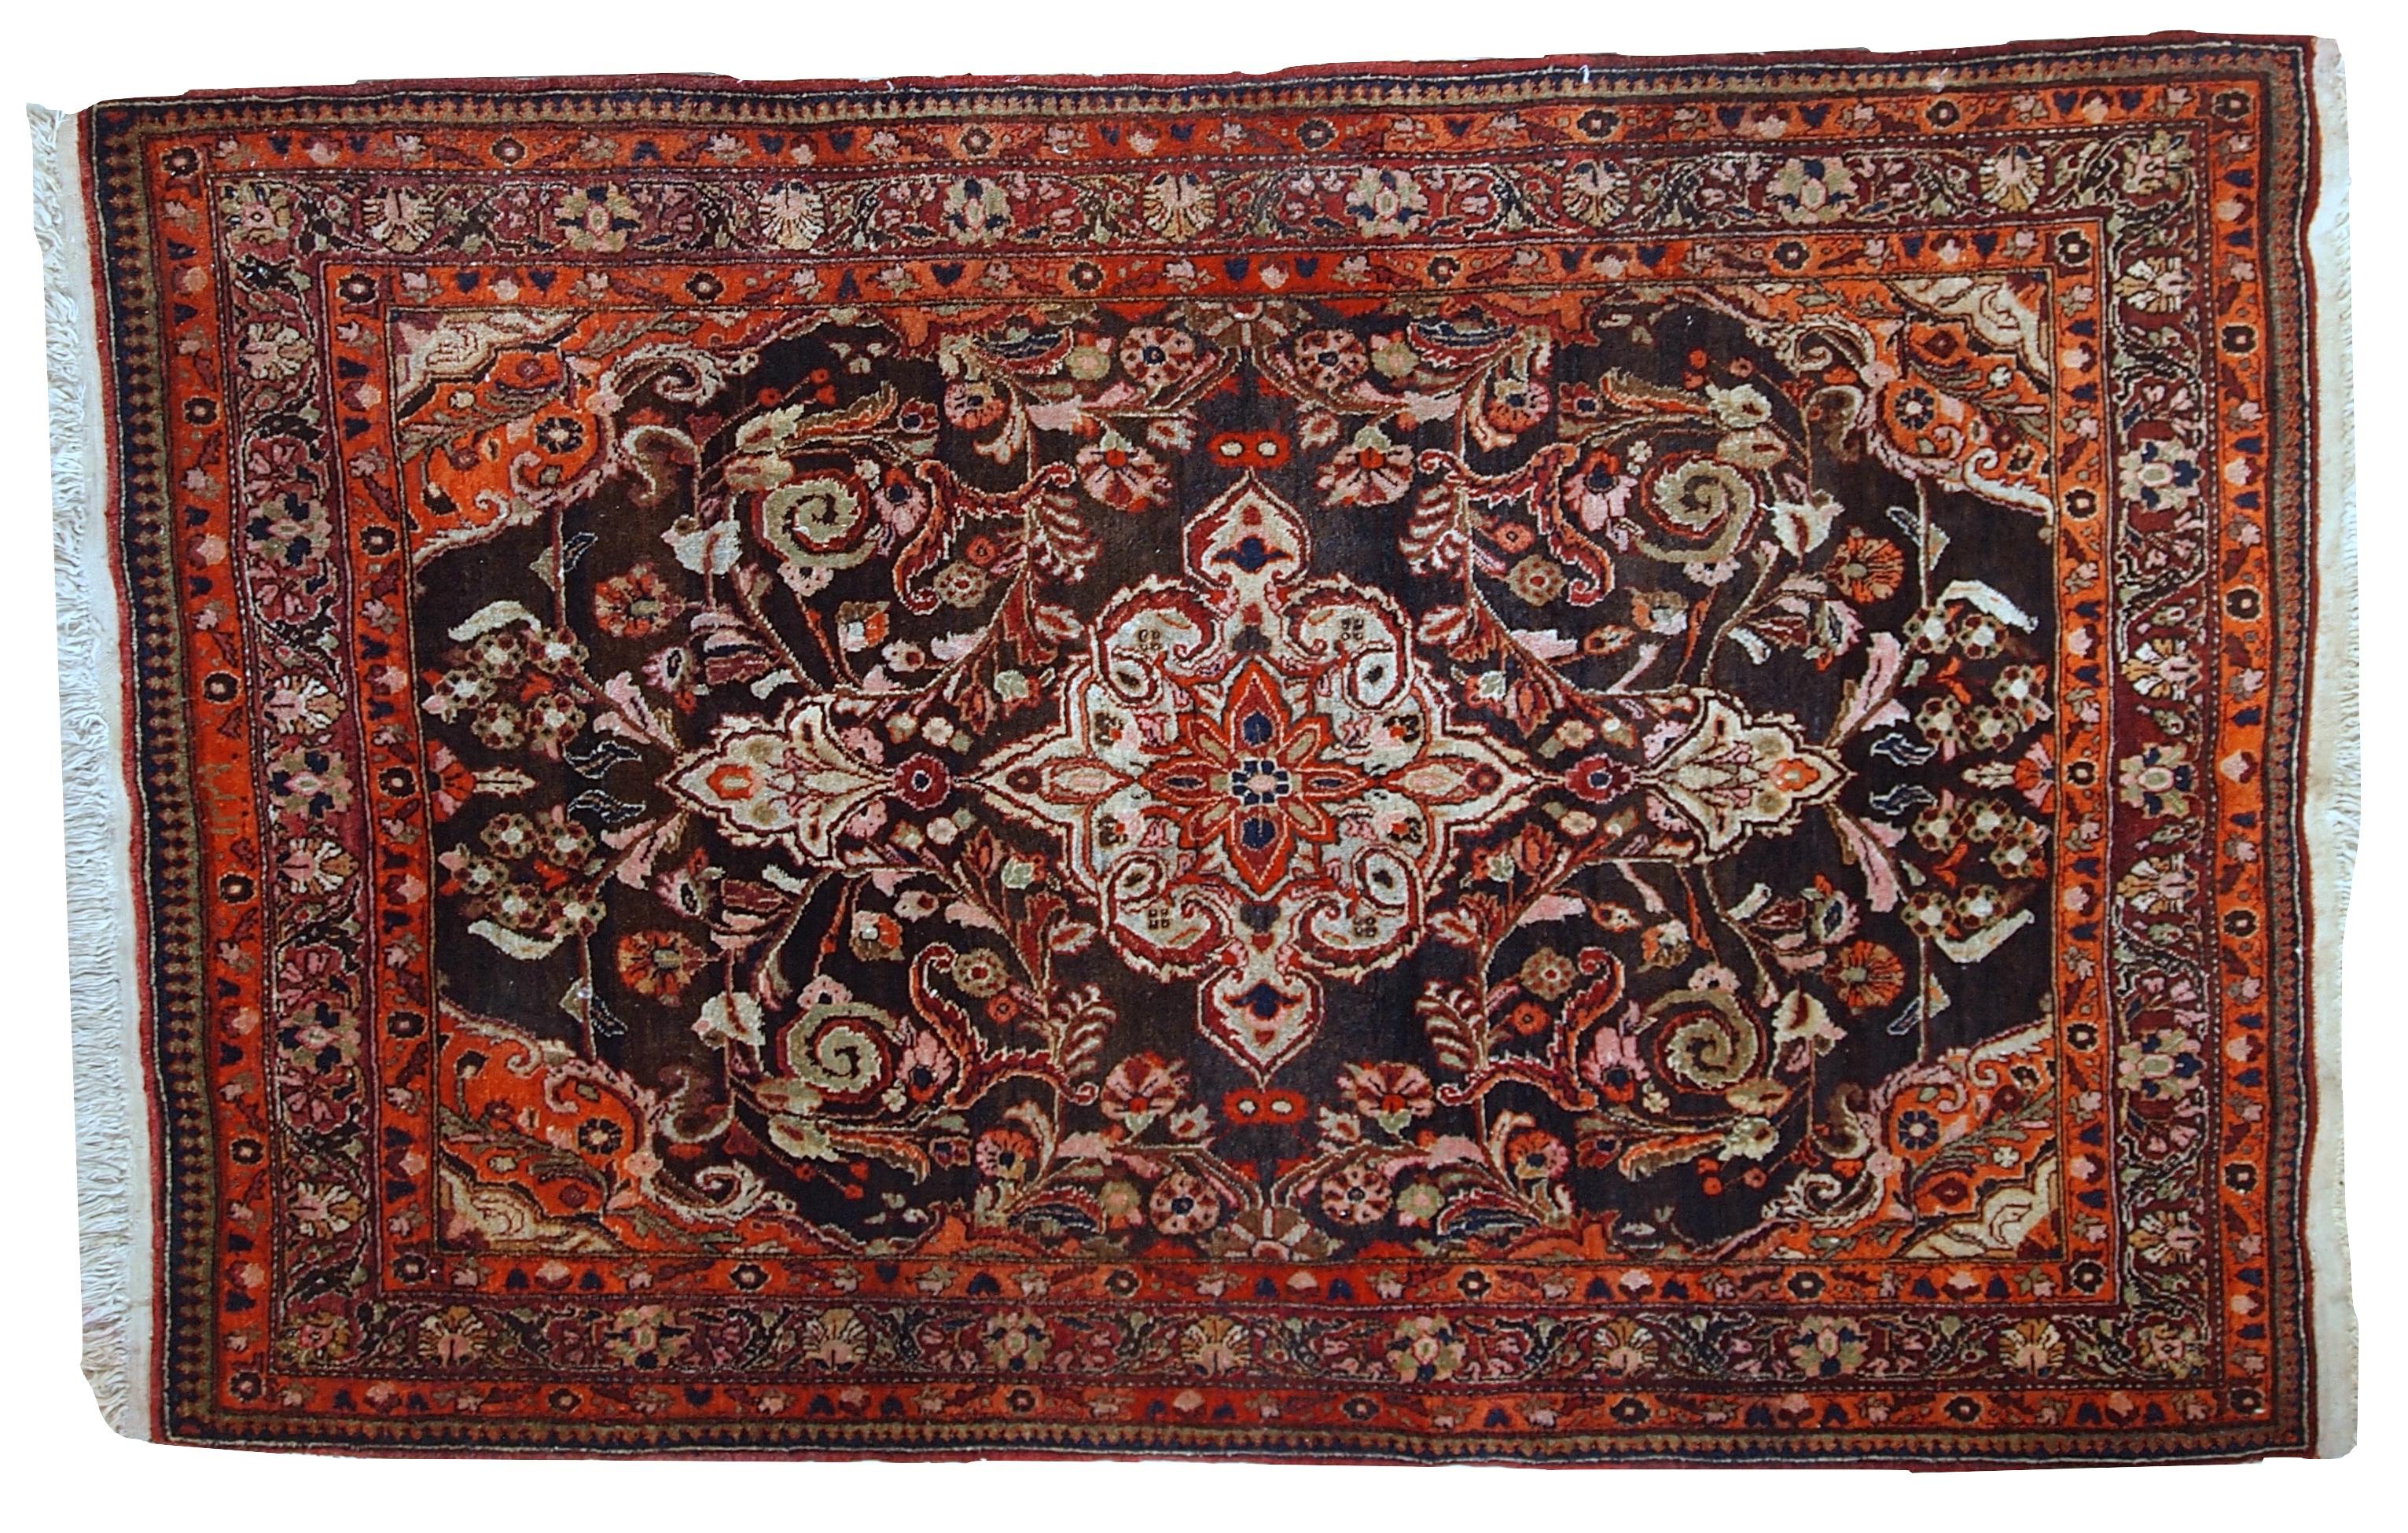 Vintage Tabriz style rug in original good condition. It is in chocolate brown and orange wool with some olive and pink shades.